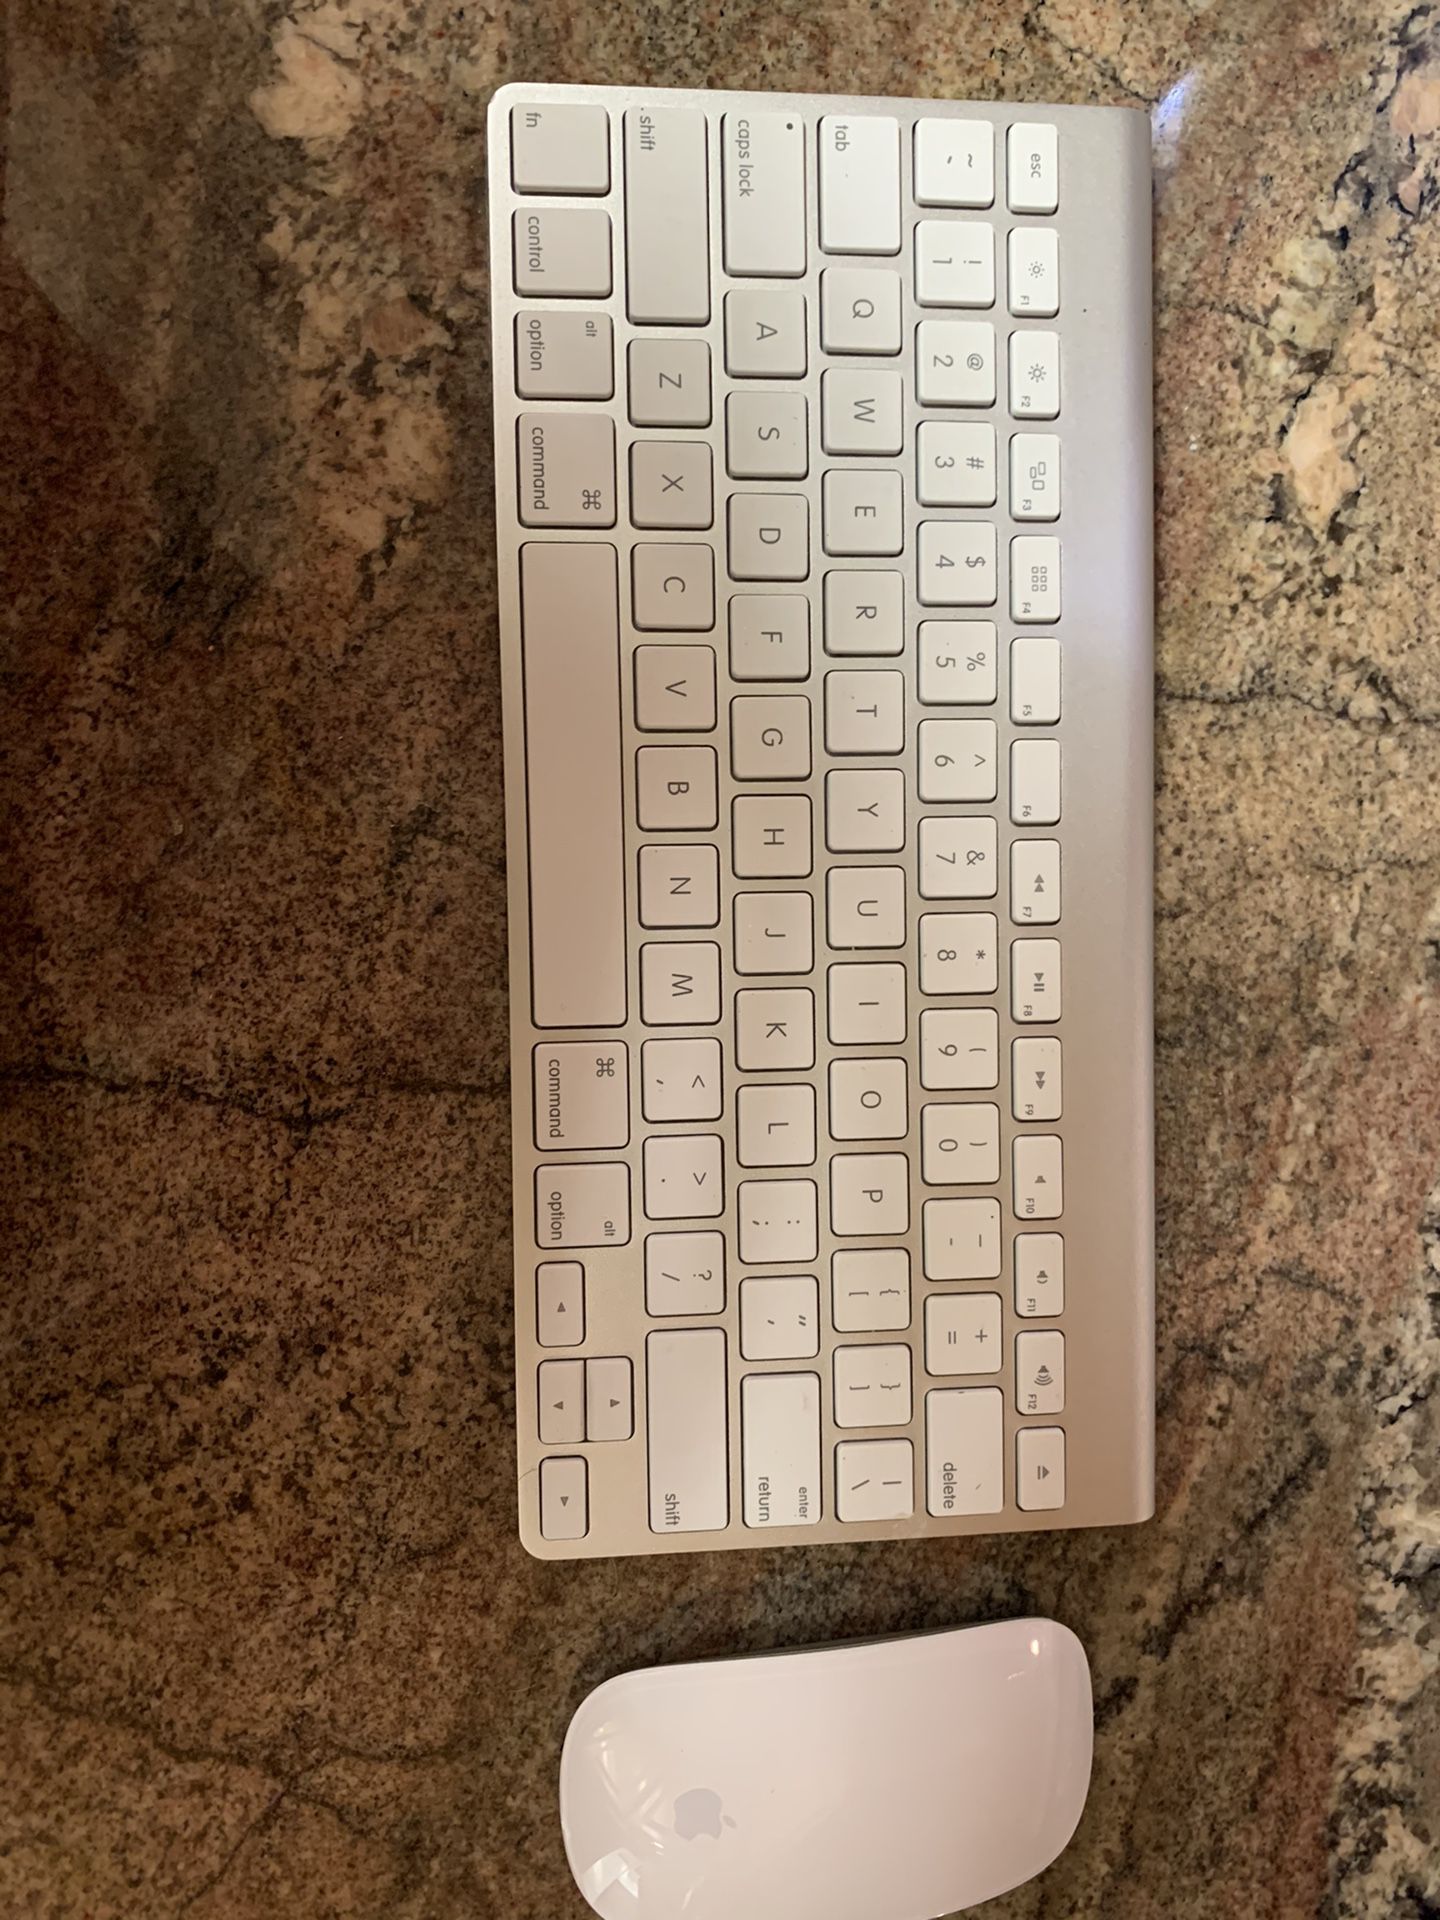 Wireless Apple keyboard and mouse